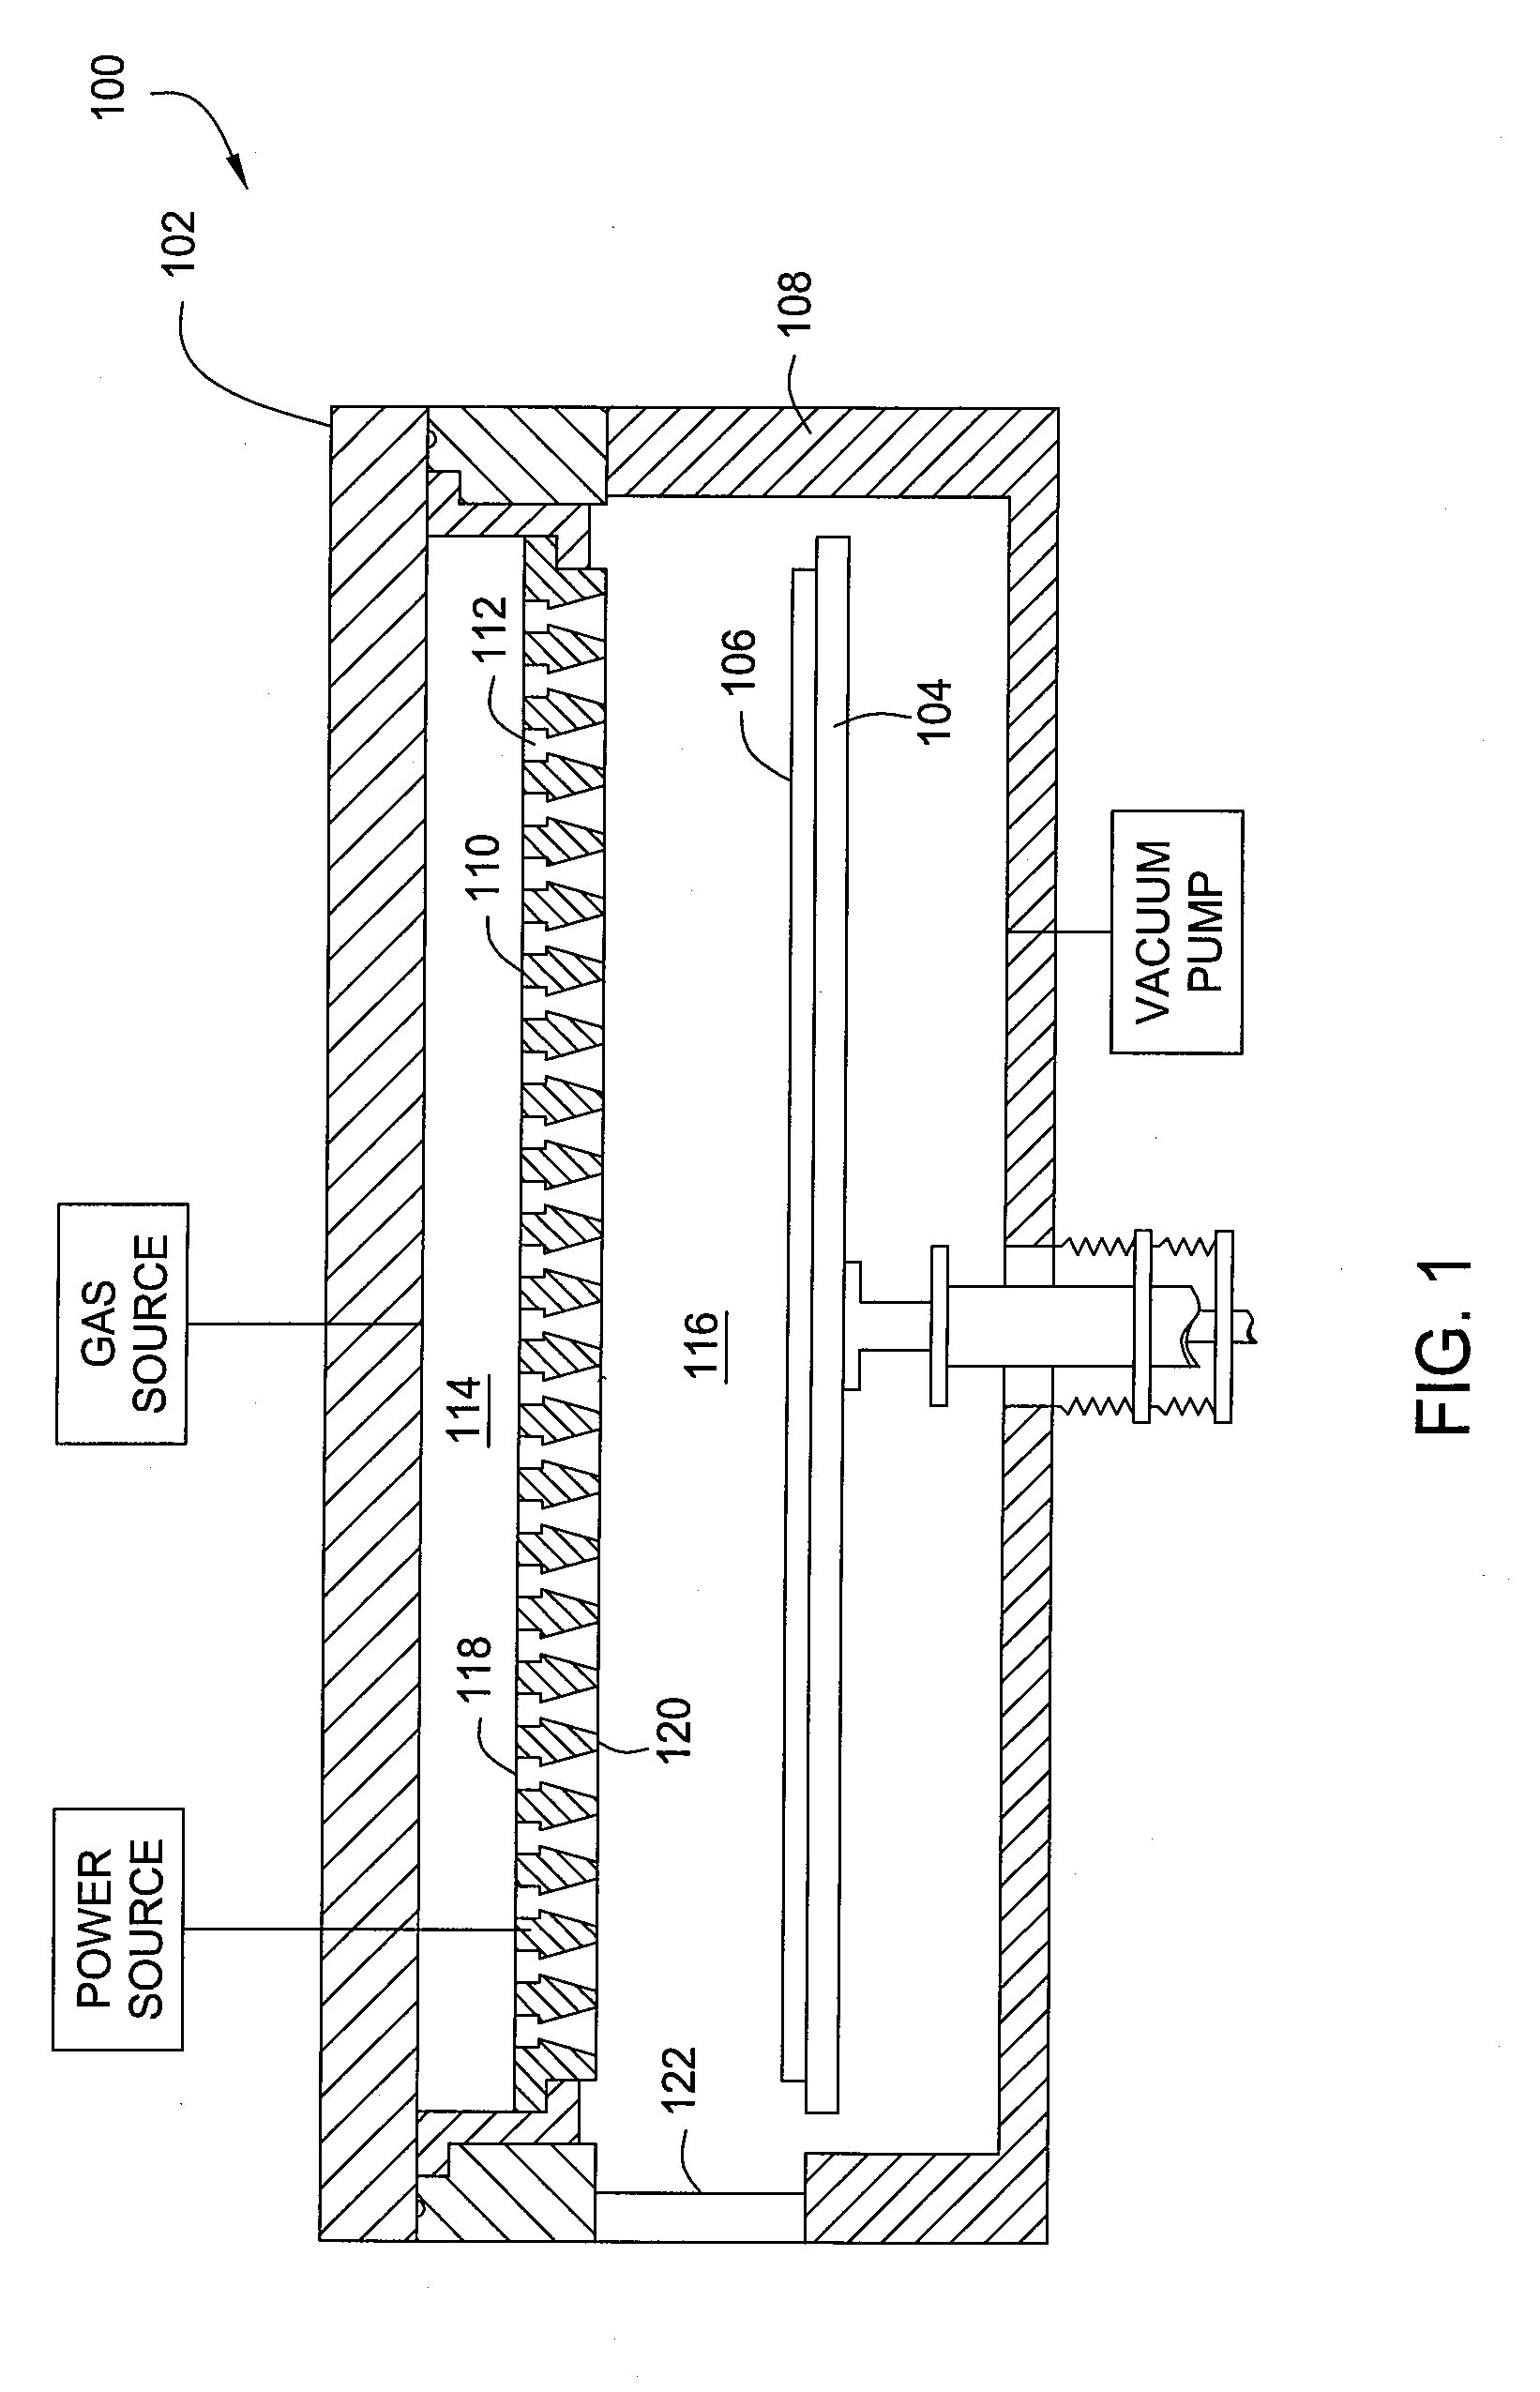 Diffuser plate with slit valve compensation